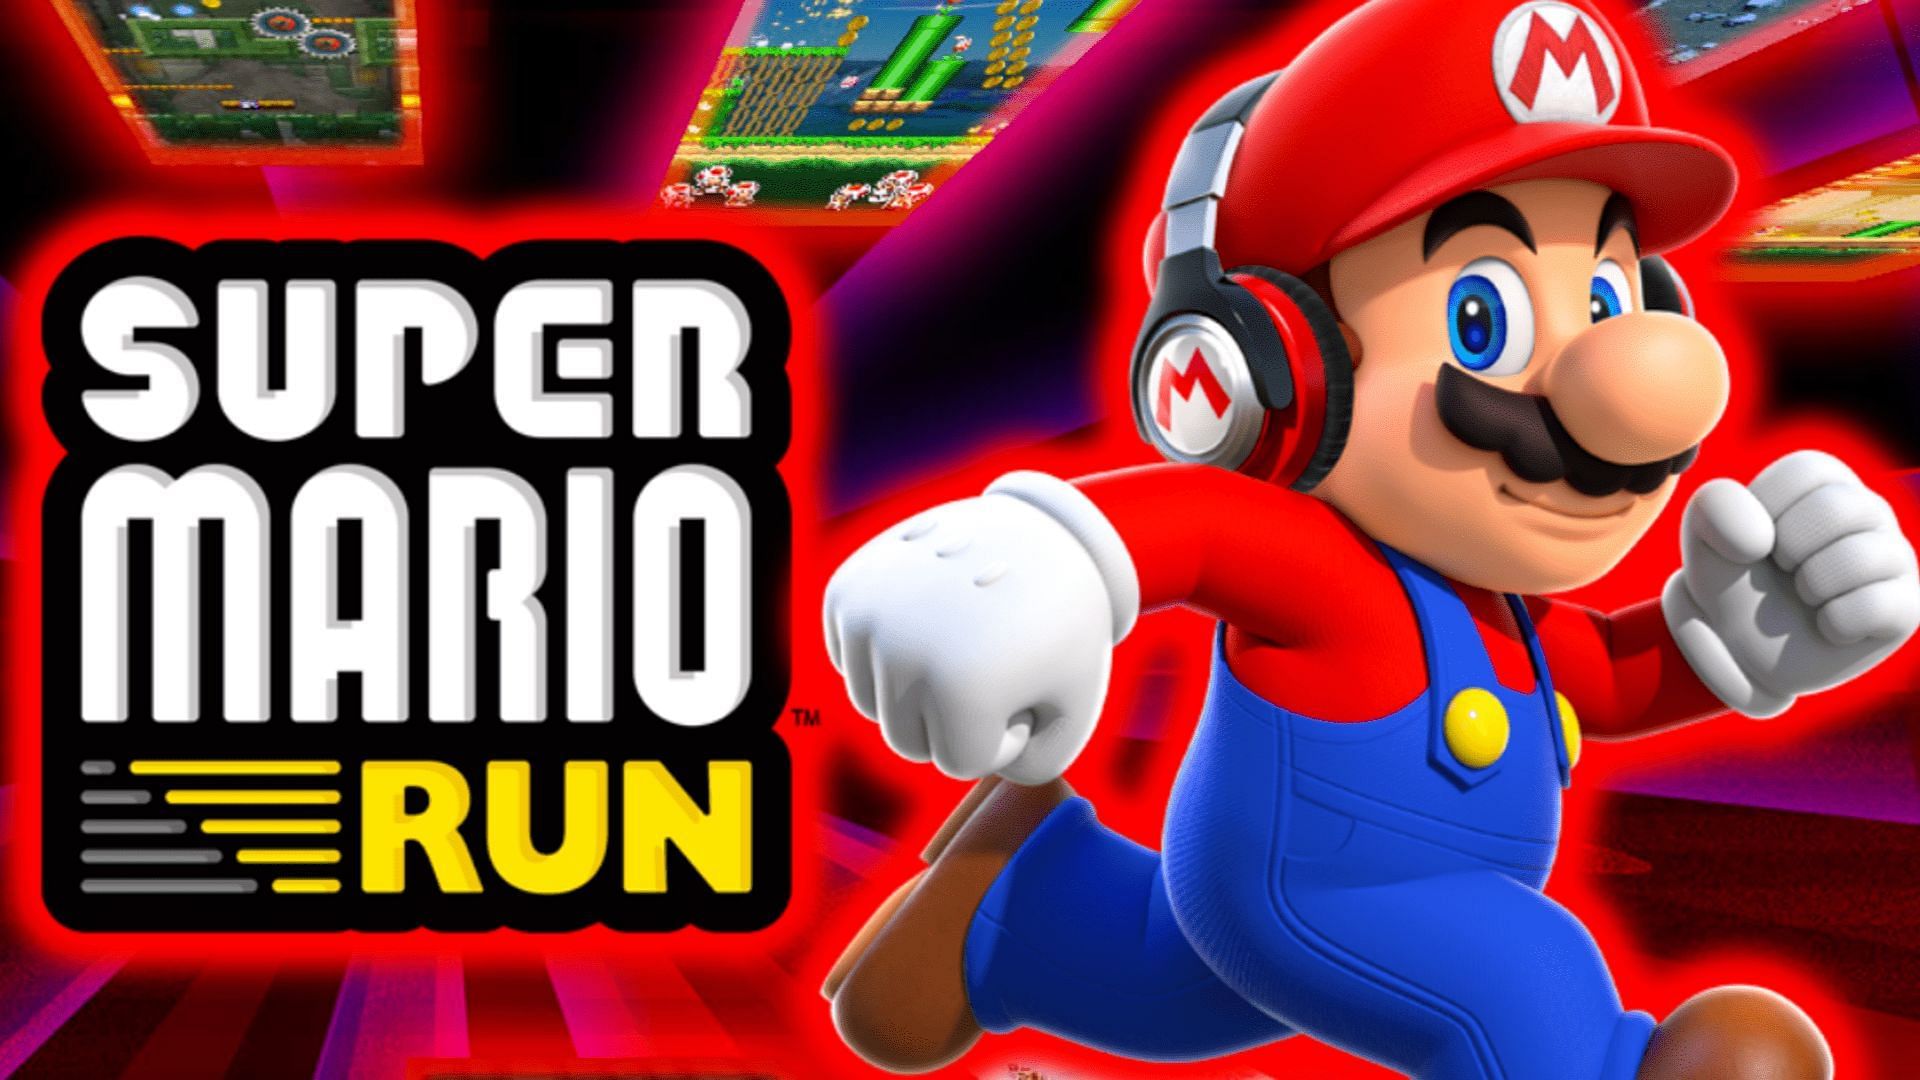 Super Mario Run, the very first official Mario game on Android and iOS. (Image via Nintendo)